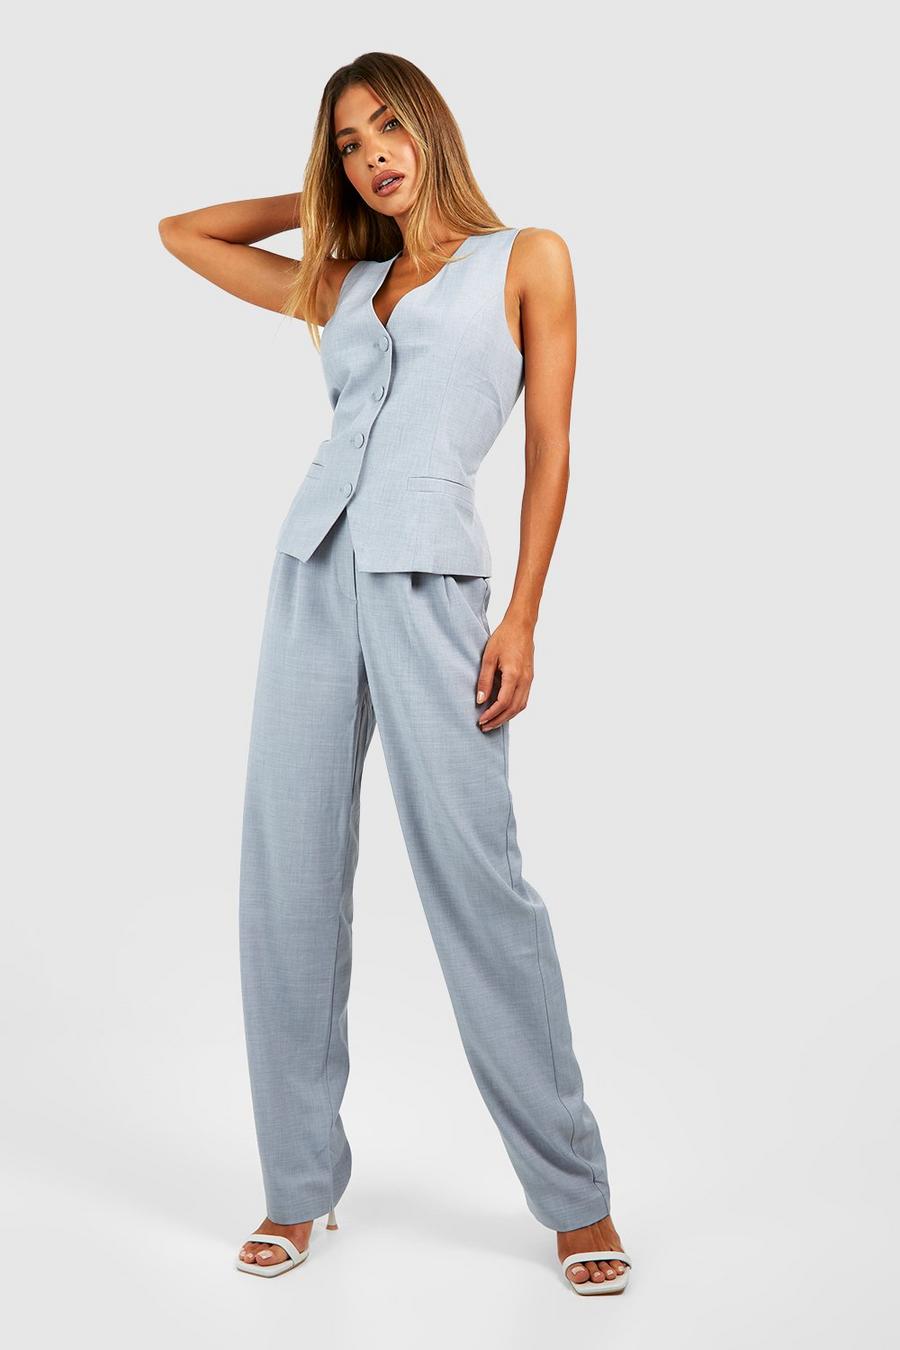 Grey Marl Pleat Front Straight Leg Trousers